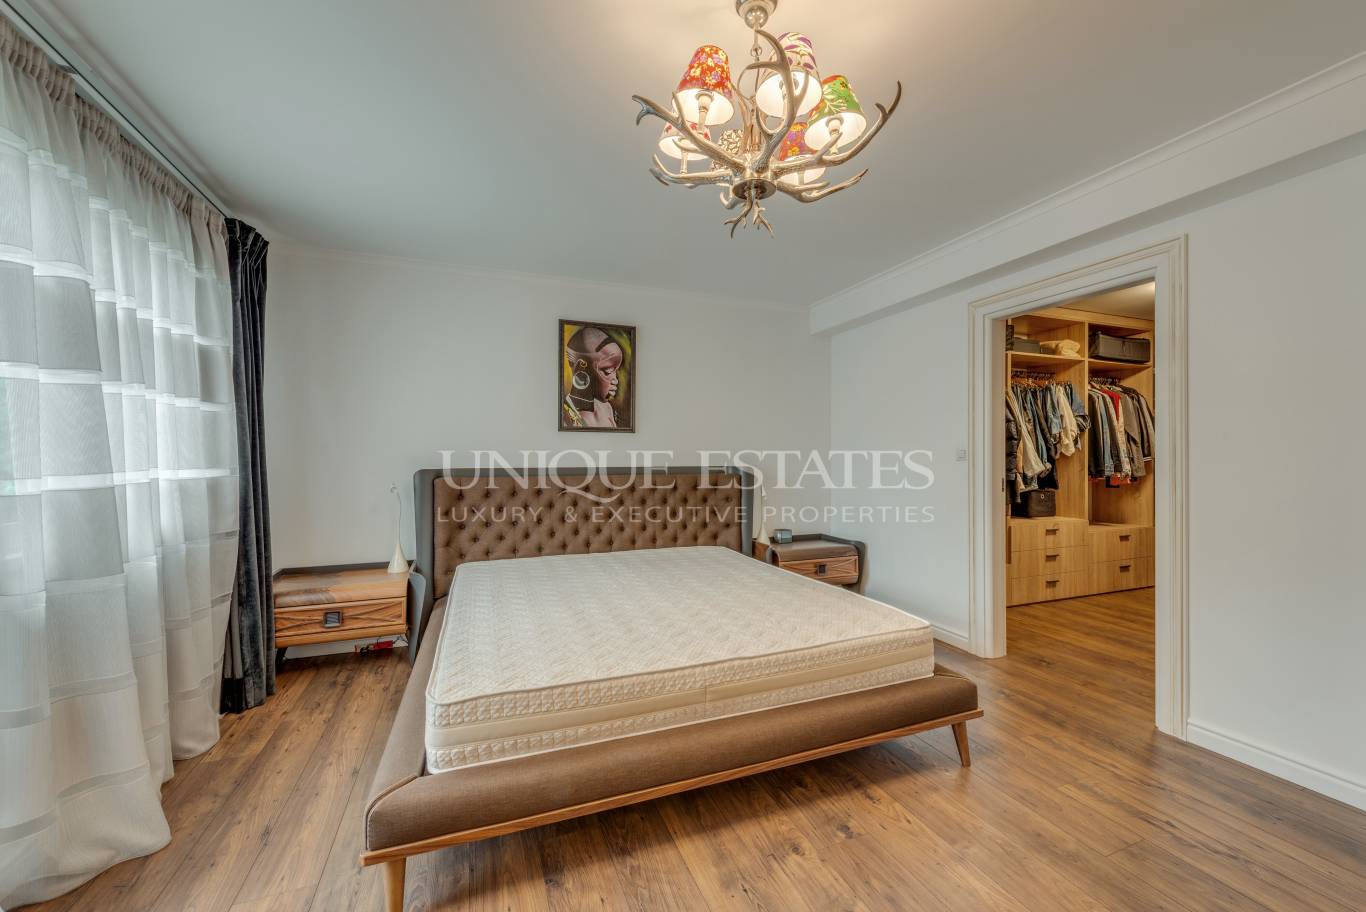 House for sale in Sofia, Downtown with listing ID: K13548 - image 8